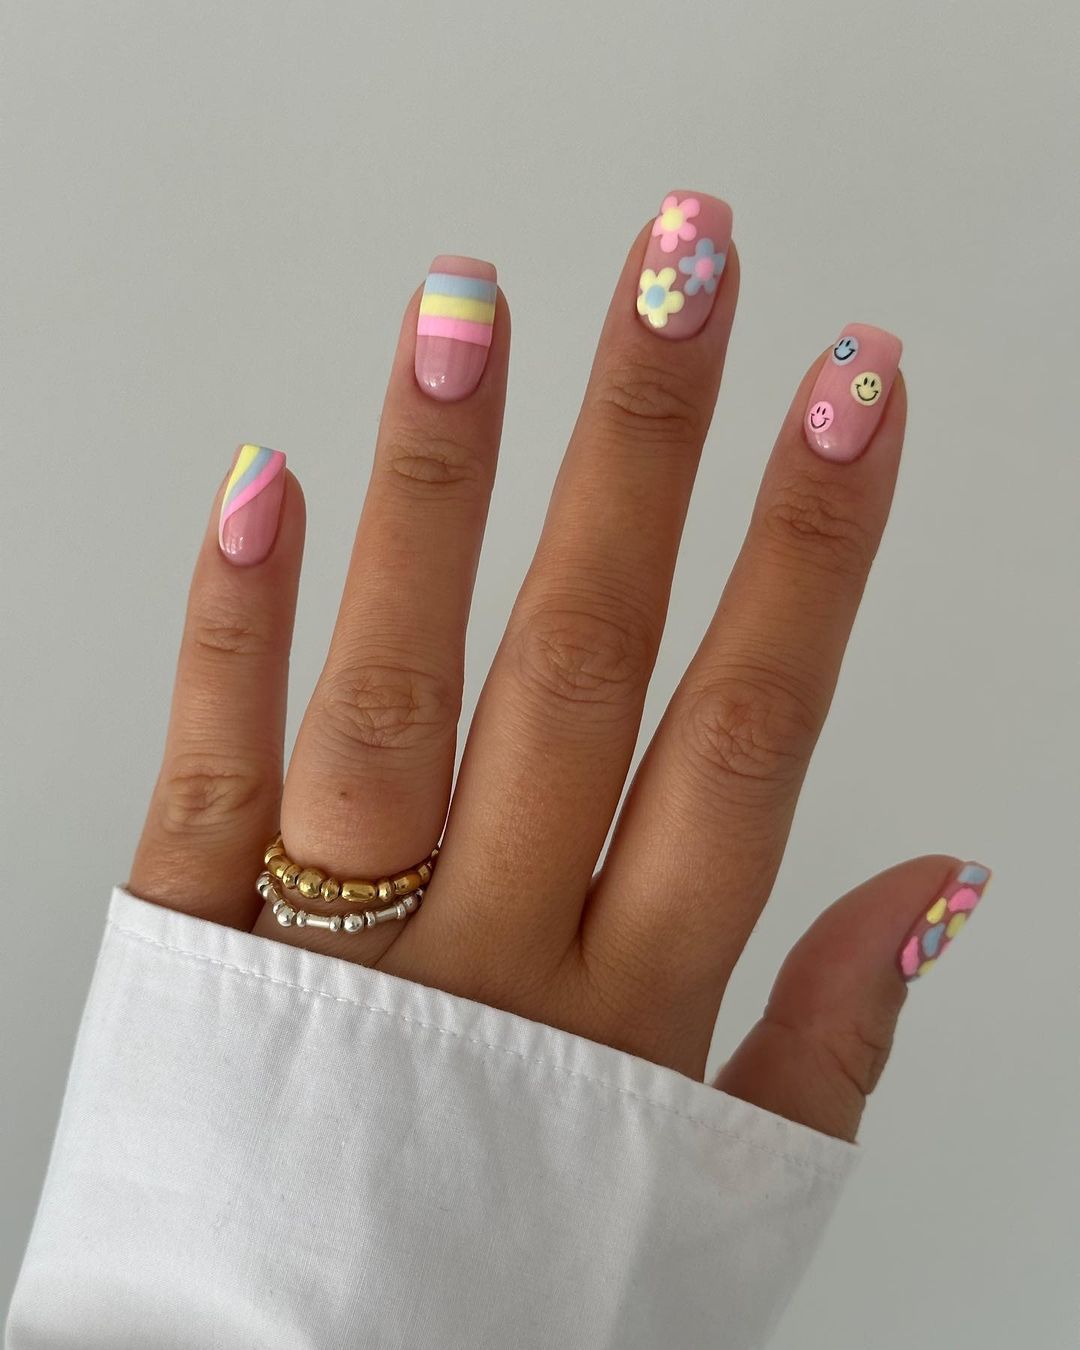 Enhance Your Manicure with a Unique Tribal Accent Nail Design